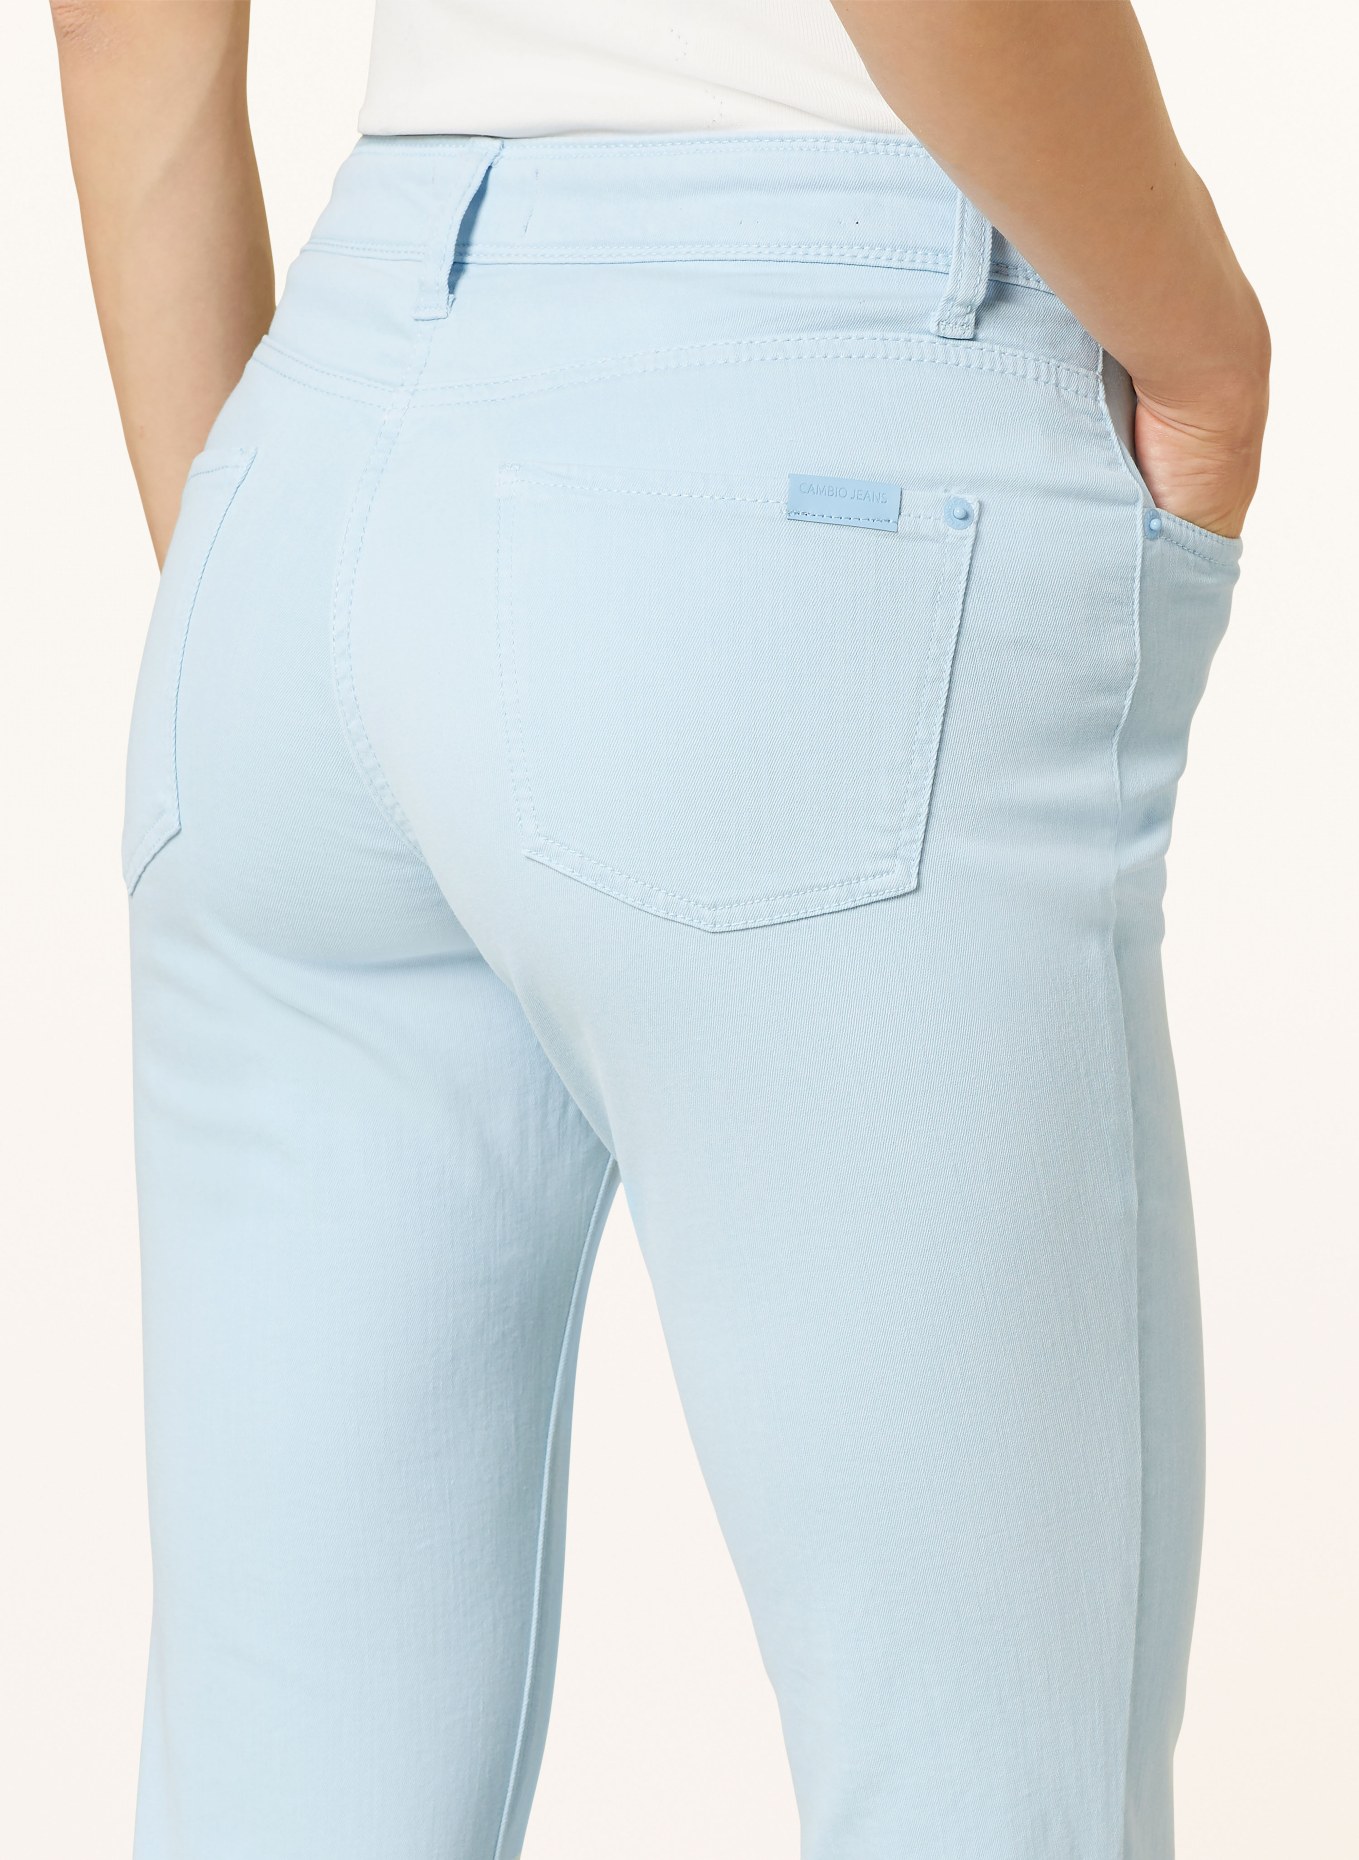 CAMBIO 7/8 jeans PIPER, Color: 408 airy blue (Image 5)